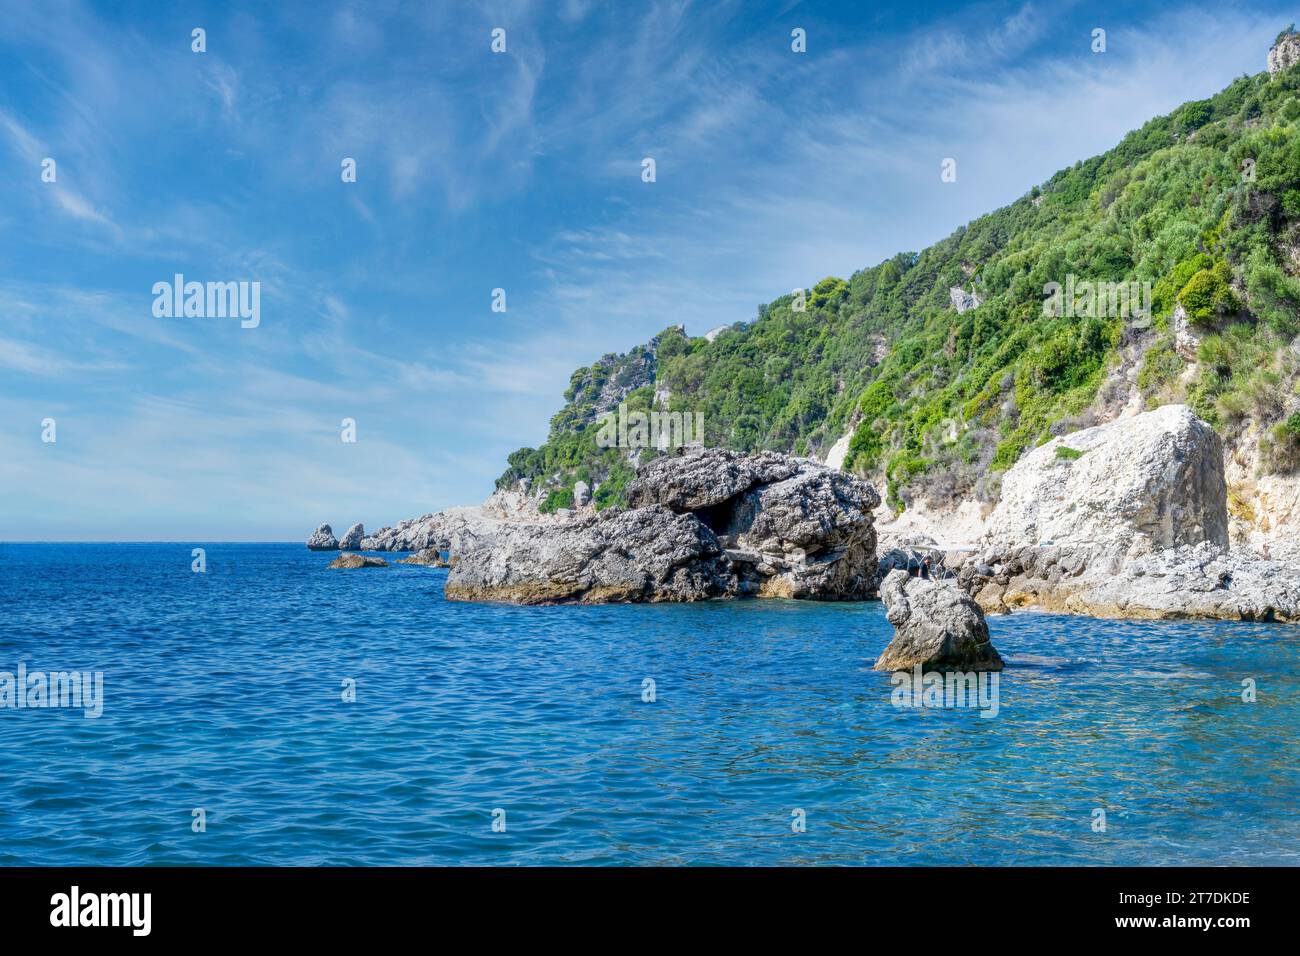 A view out to sea from the beach at Ermones Bay, Paralia Ermones, Corfu, Greece Stock Photo